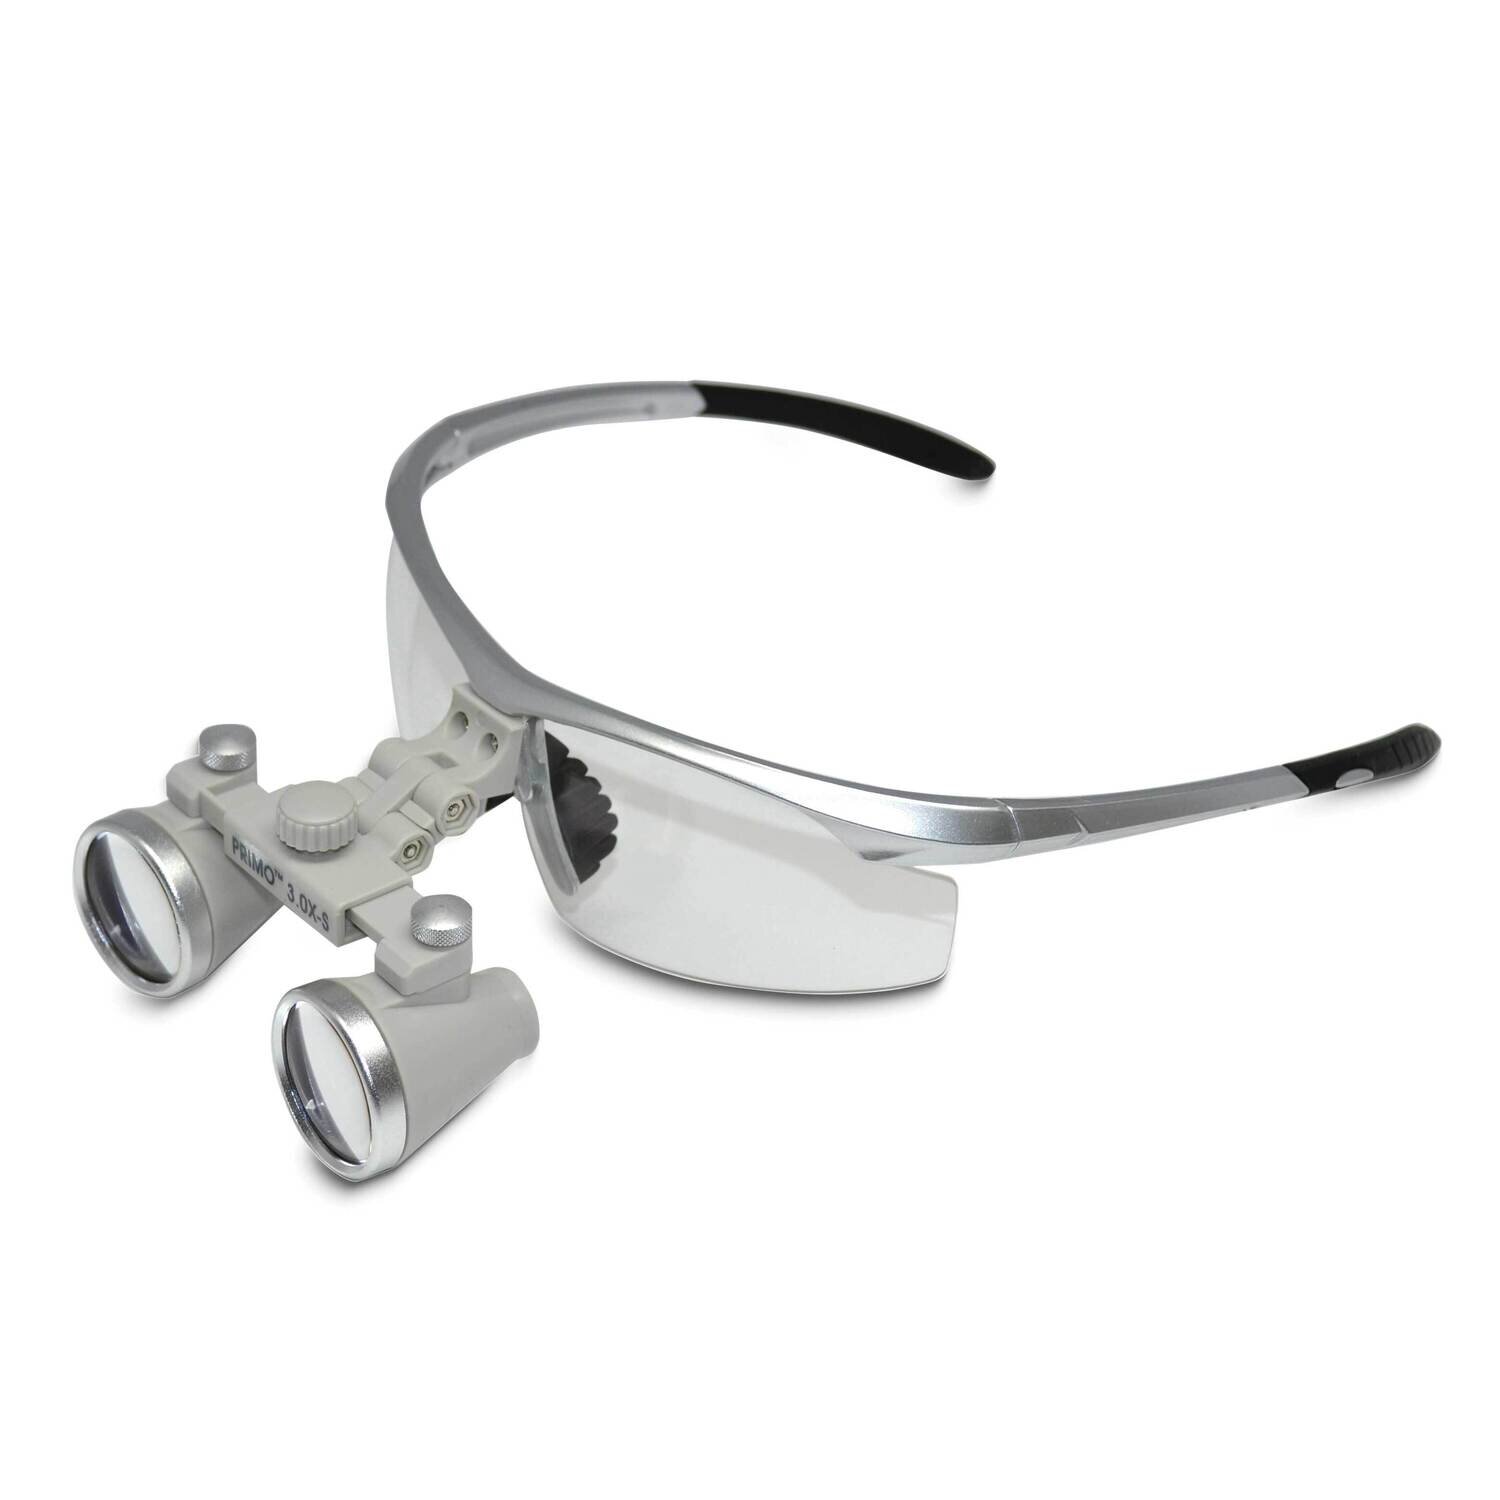 Optic Setter's 3X Magnification Safety Glasses JT5500